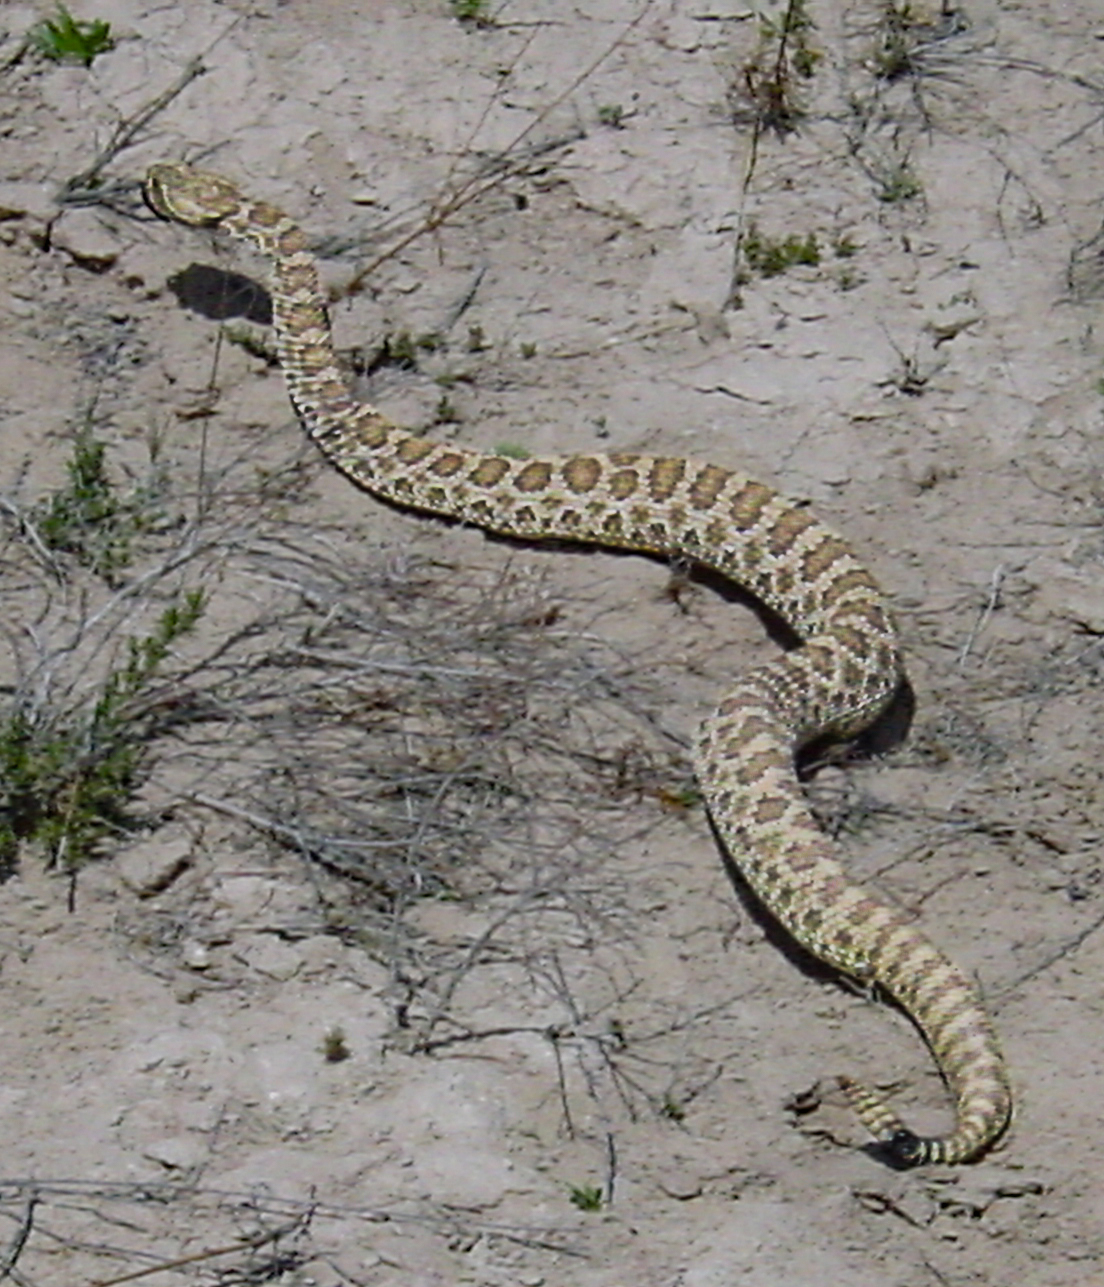 A rattle snake moves away